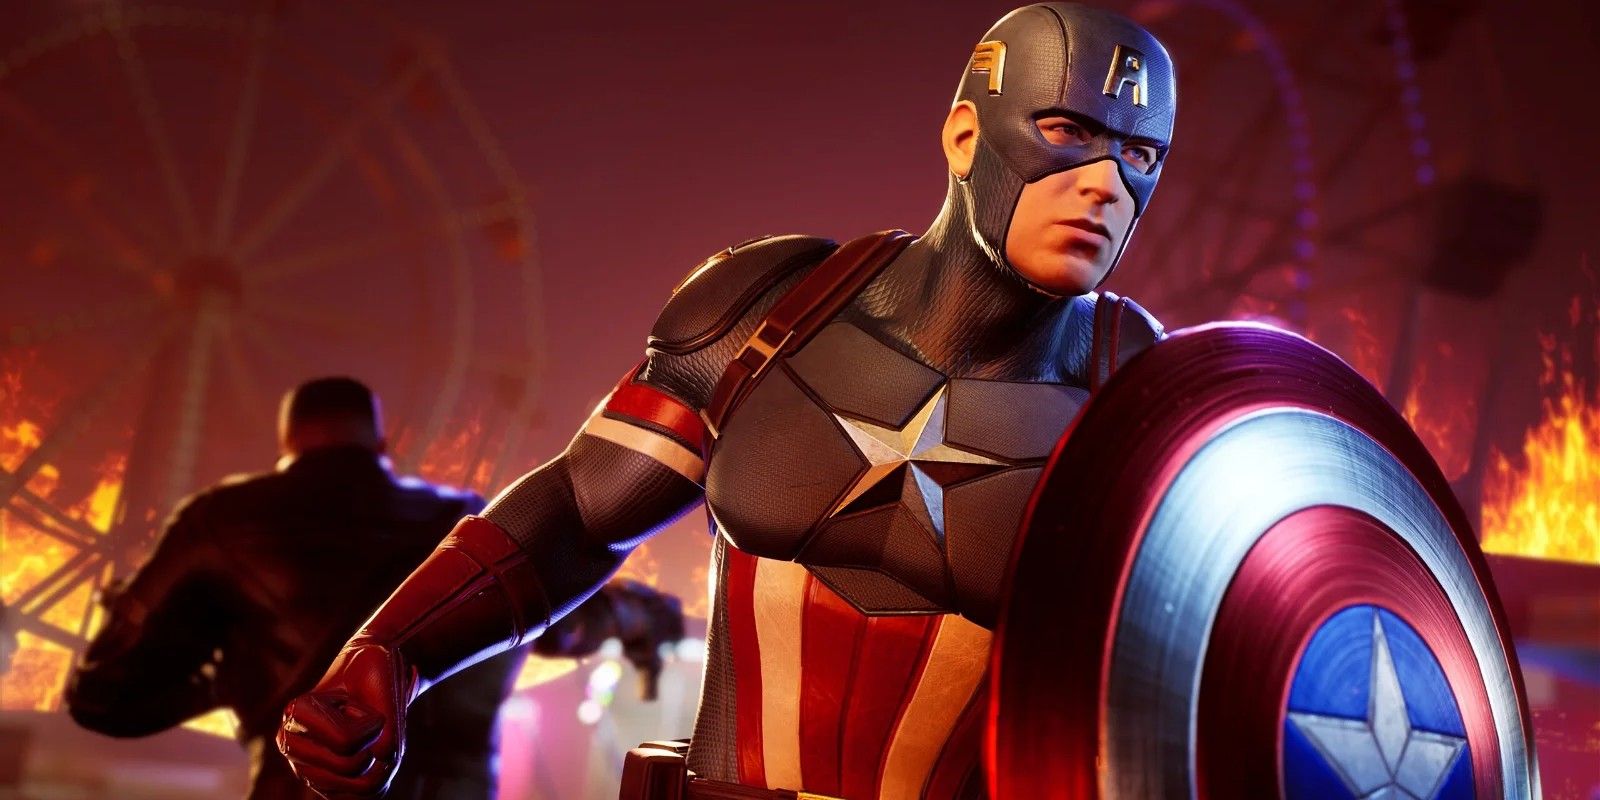 Captain America during a Marvel's Midnight Suns cutscene, with Blade's silhouette visible in the background.